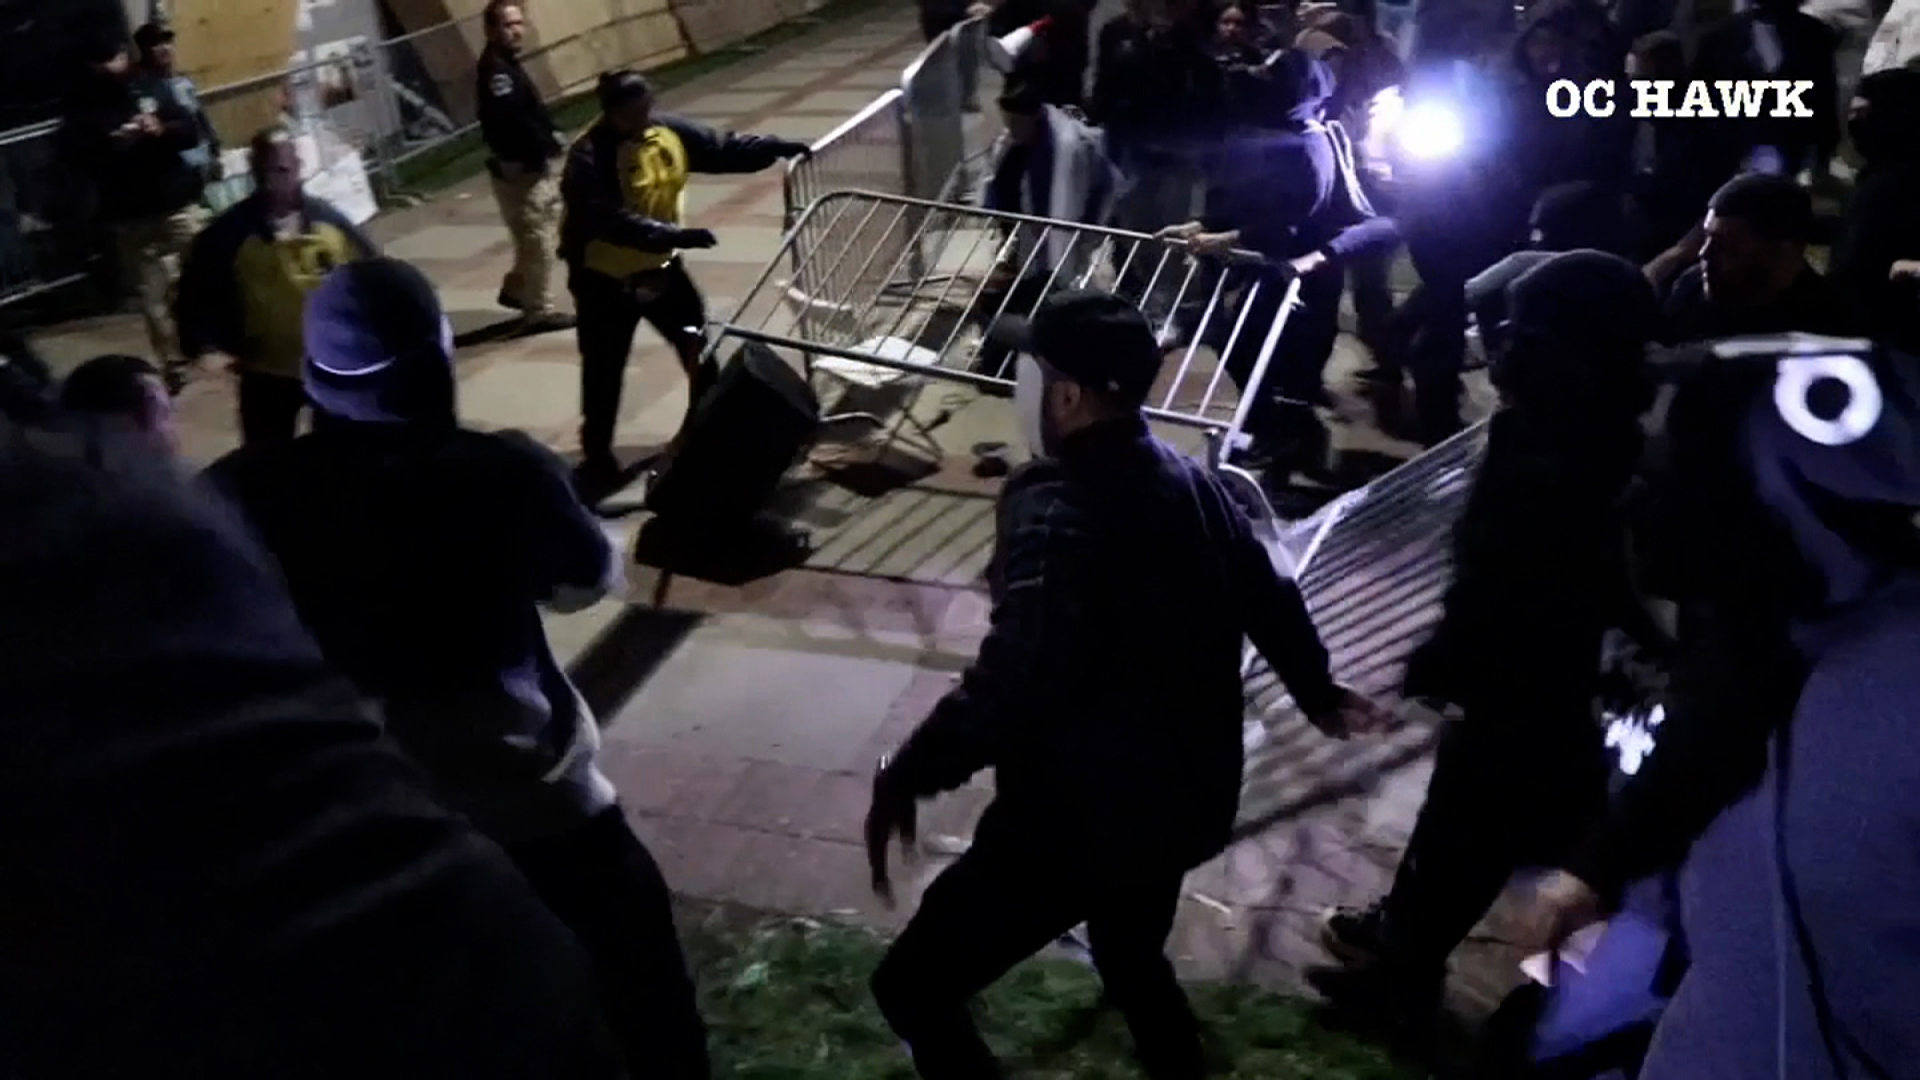 Counter protesters pull metal barricades around the pro-Palestinian encampment on the University of California, Los Angeles campus overnight. 